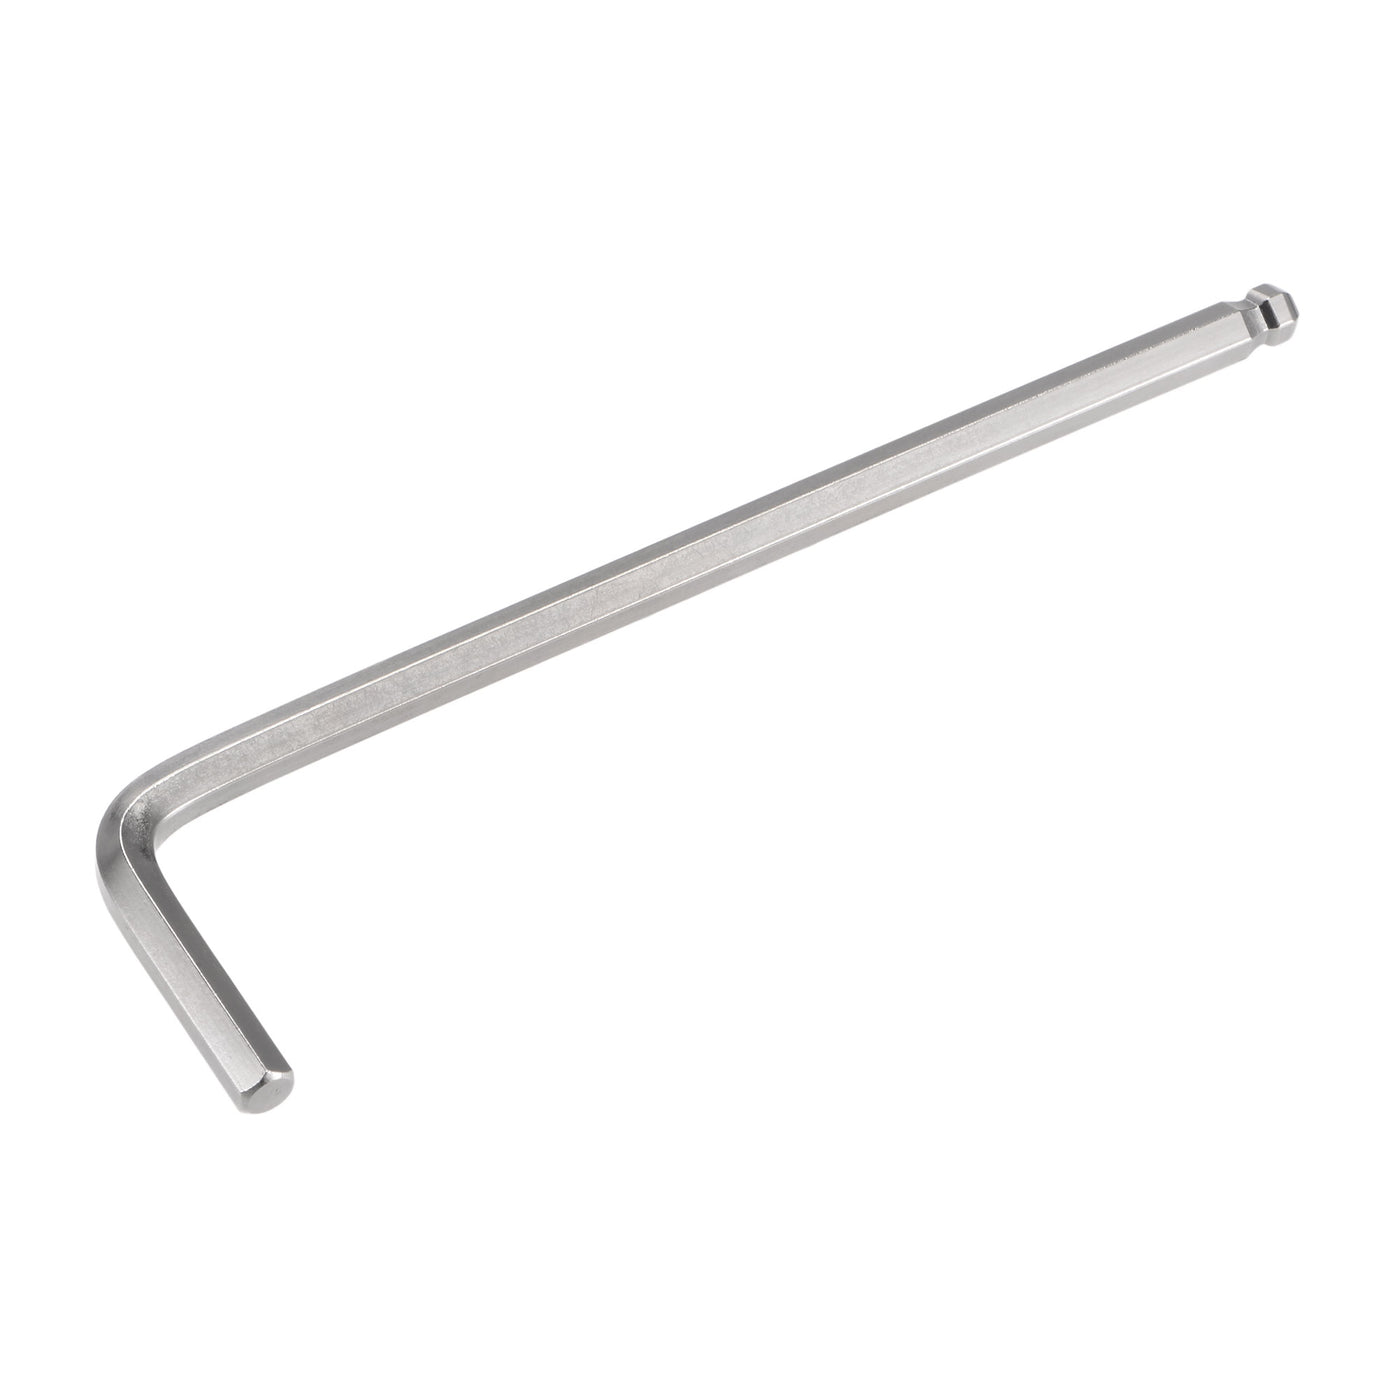 uxcell Uxcell Ball End Hex Key Wrench, L Shaped Long Arm CR-V Repairing Tool